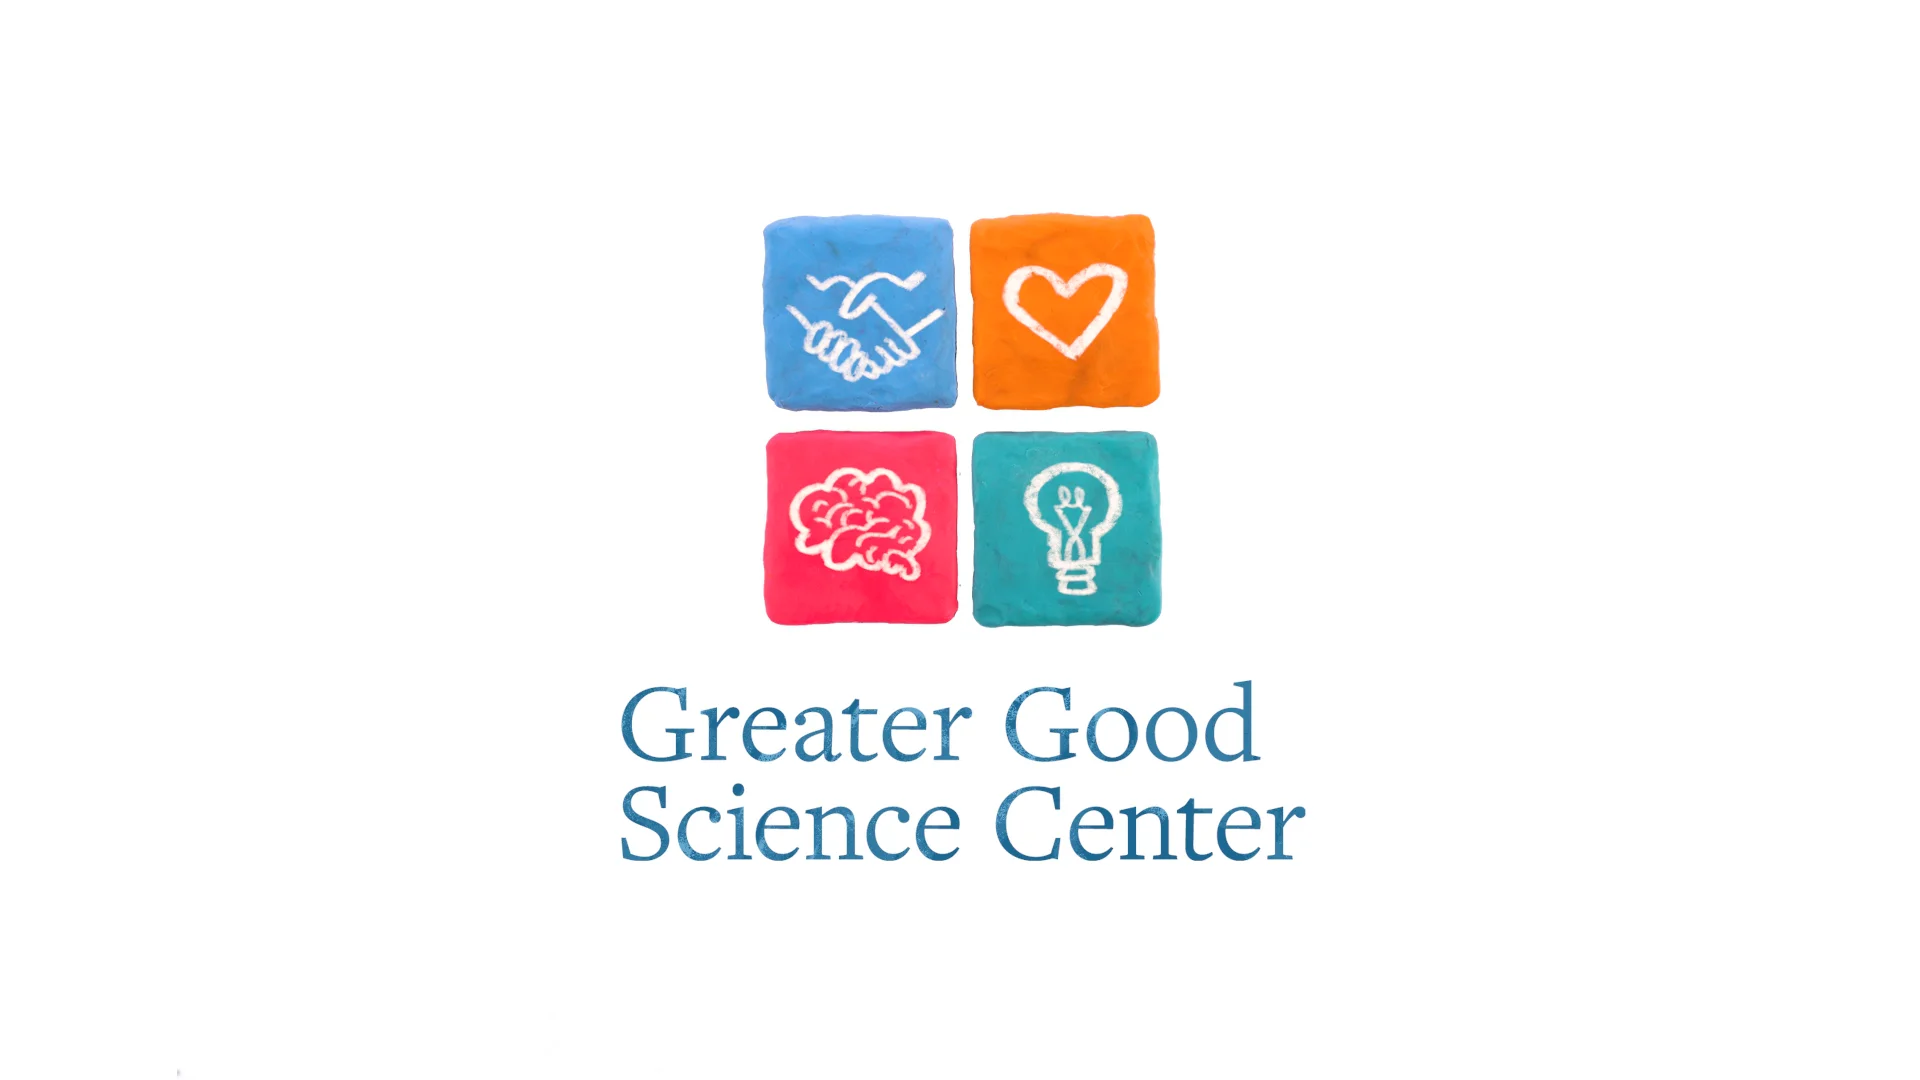 Greater Good Science Center (@greatergoodmag) • Instagram photos